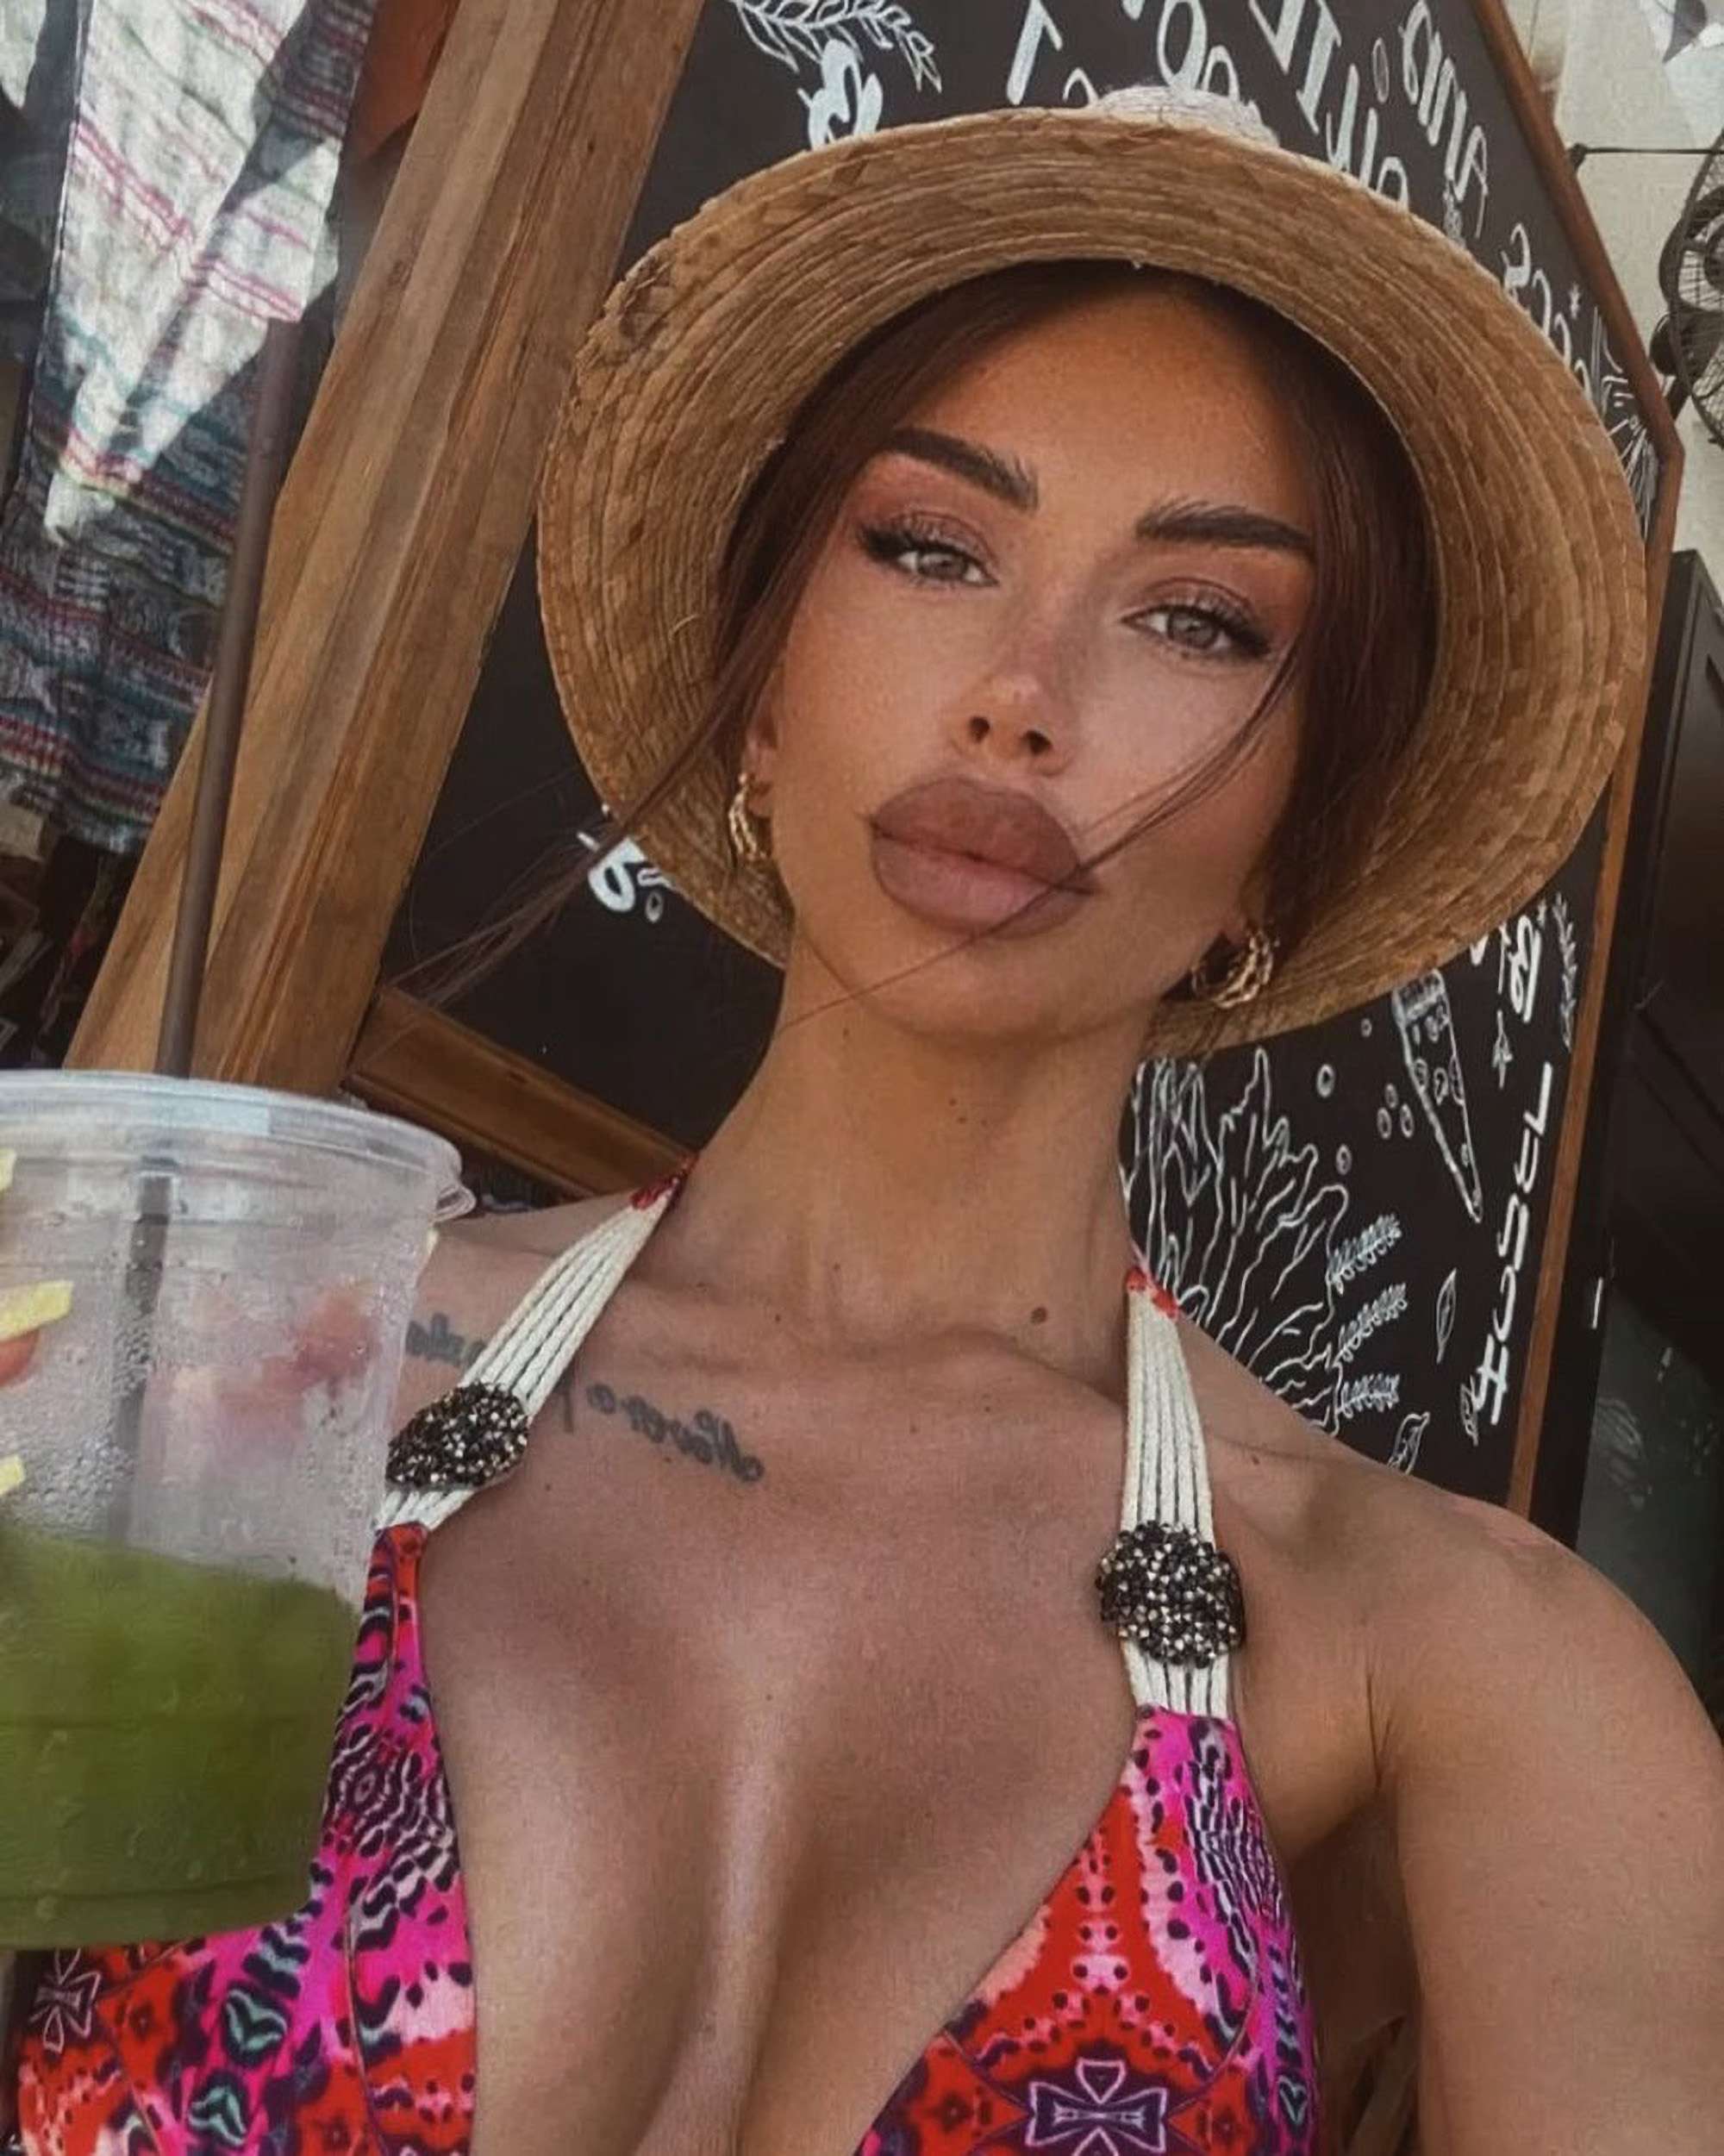 Gorgeous Influencer Says The Seatbelt Saved Her Life After Her Vehicle Overturned During Night Out In Greece